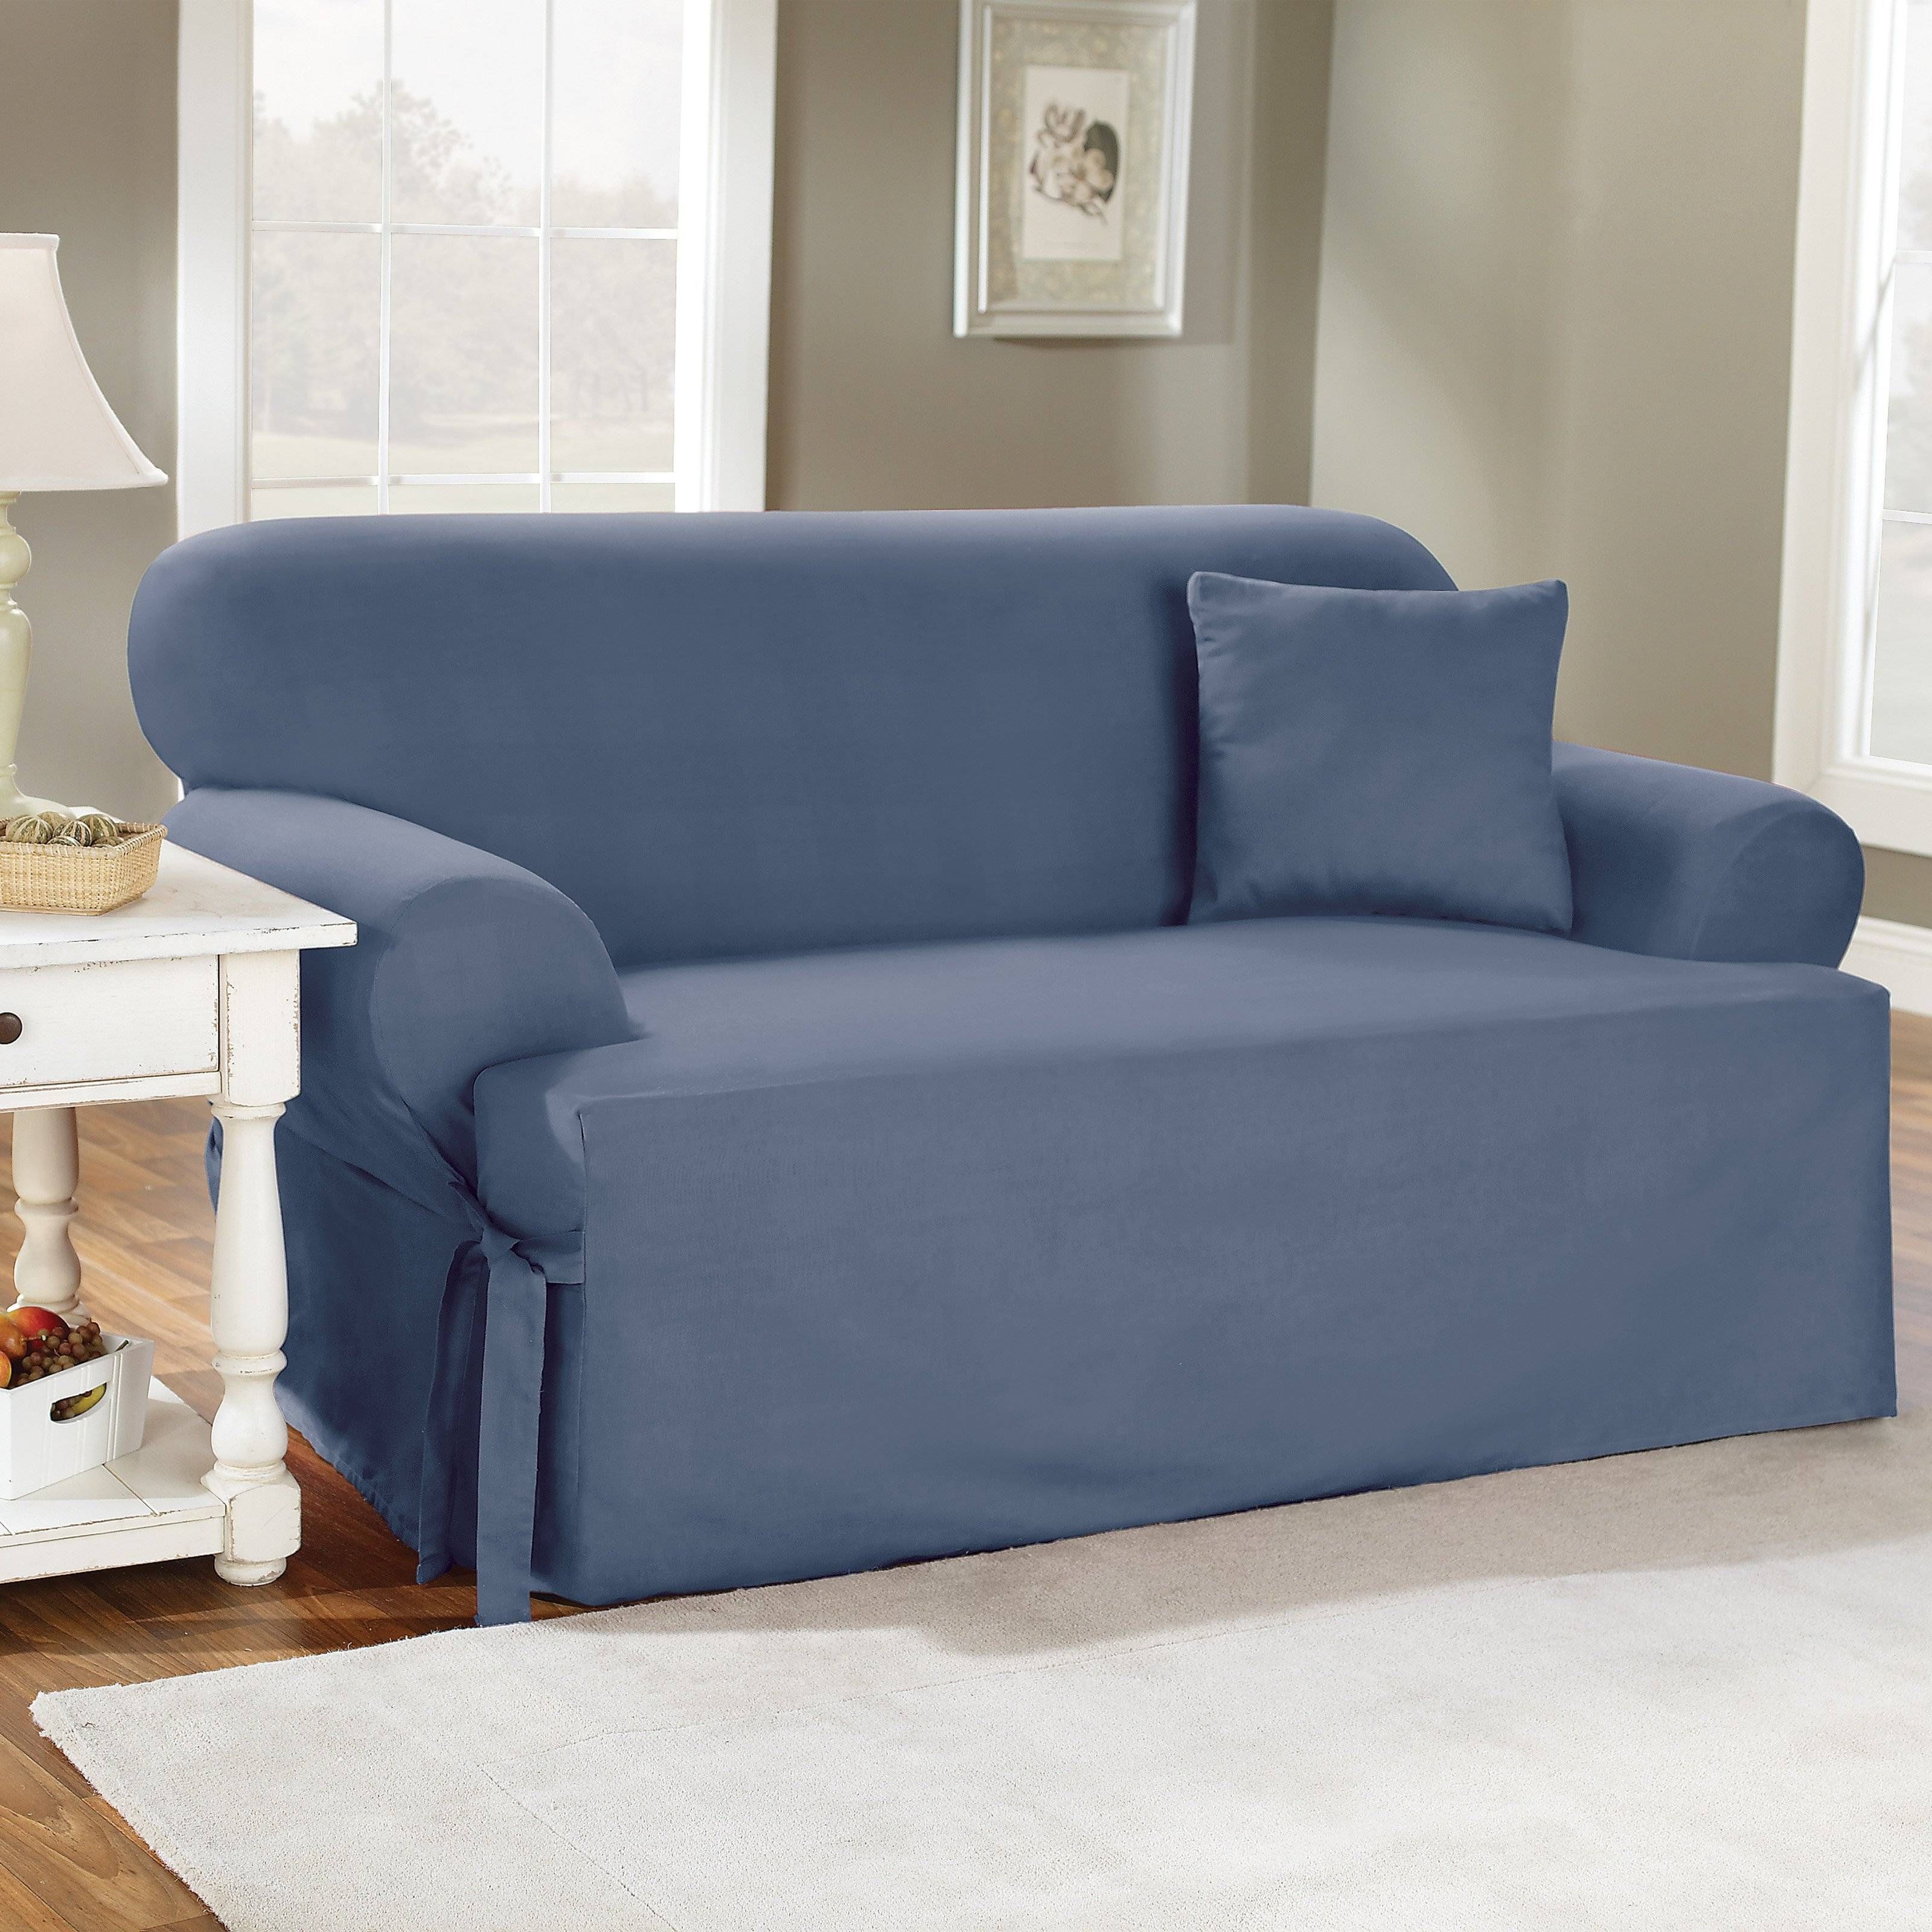 Sure Fit Cotton Duck T Cushion Sofa Slipcover | Hayneedle Intended For Sofa Cushions (View 16 of 30)